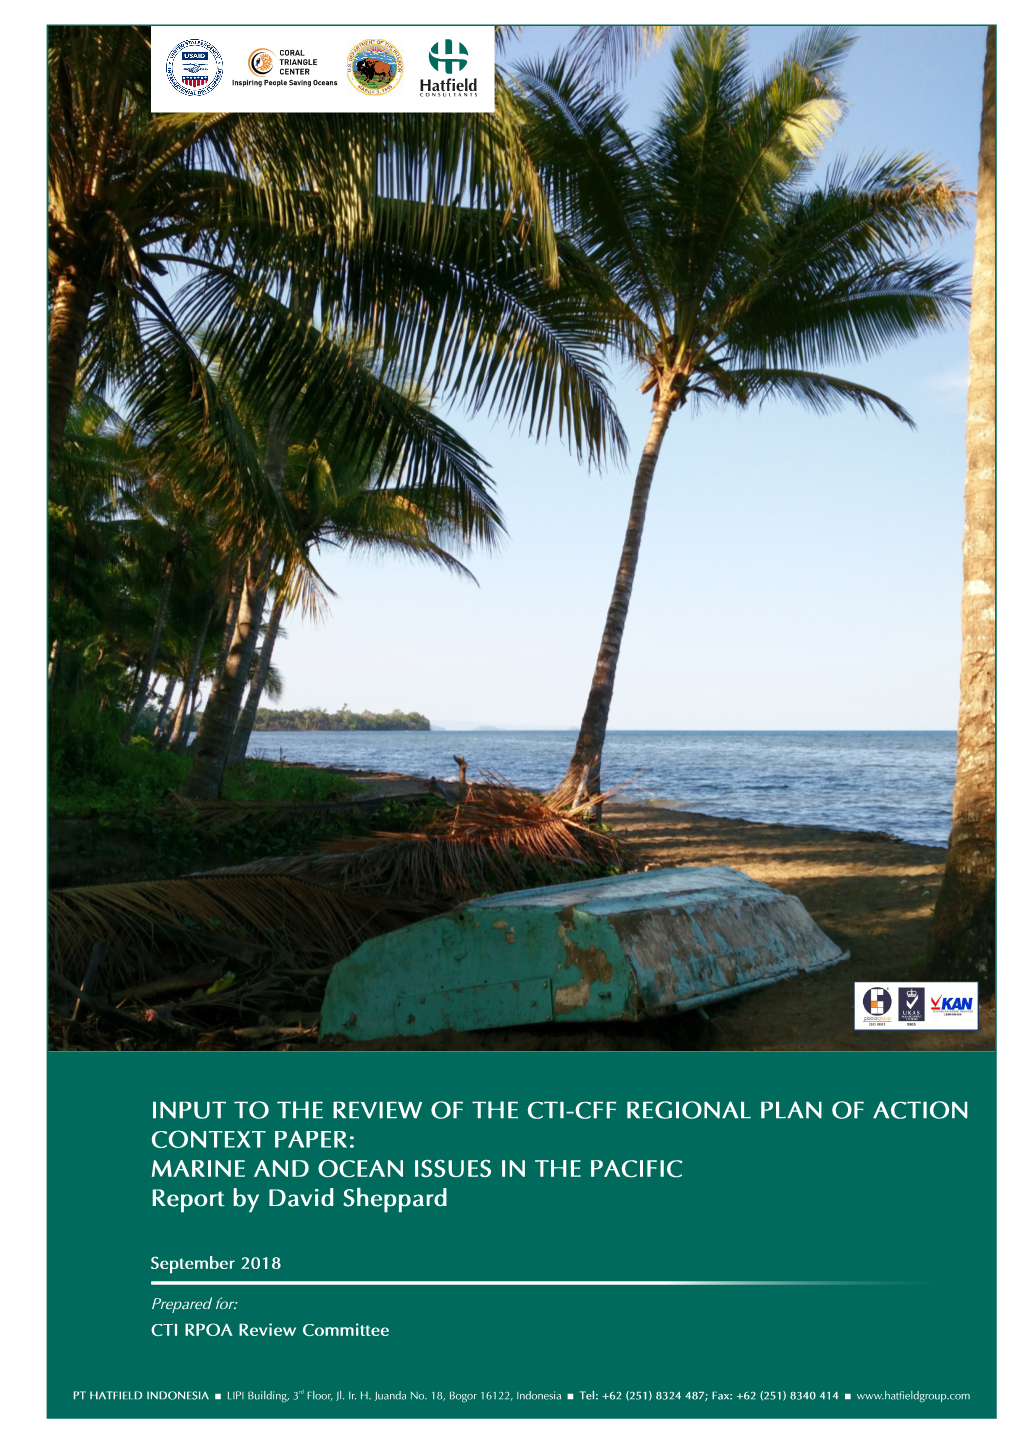 Input to the Review of the Cti-Cff Regional Plan of Action Context Paper: Marine and Ocean Issues in the Pacific